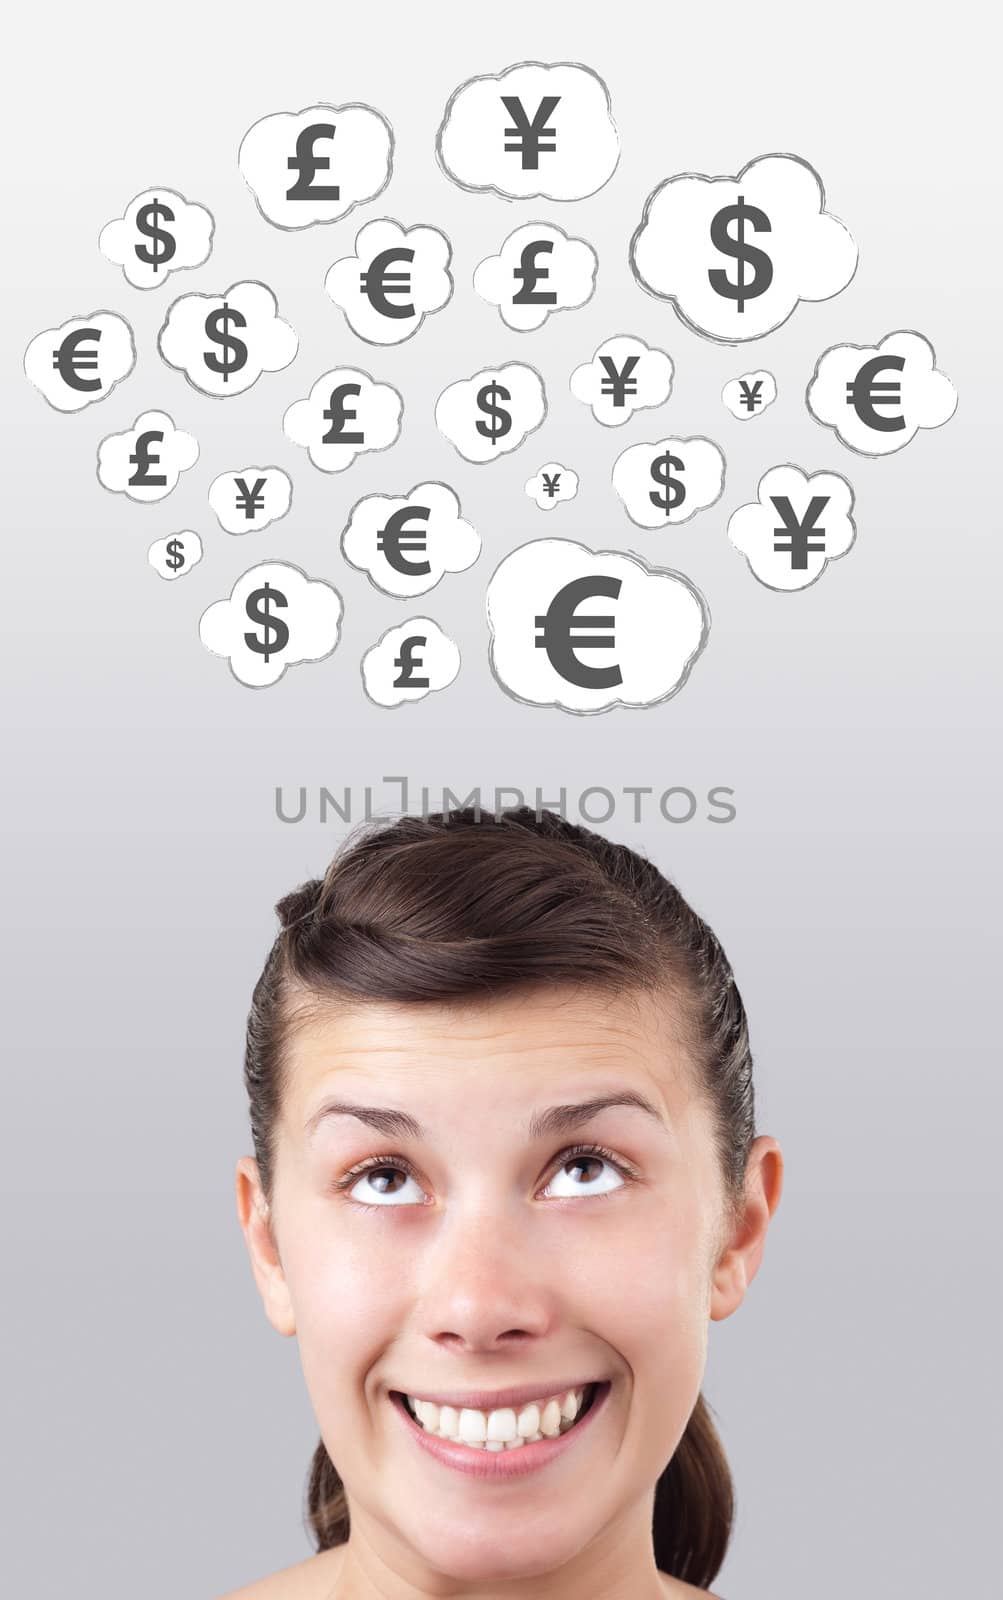 Young girl head looking at business icons and images